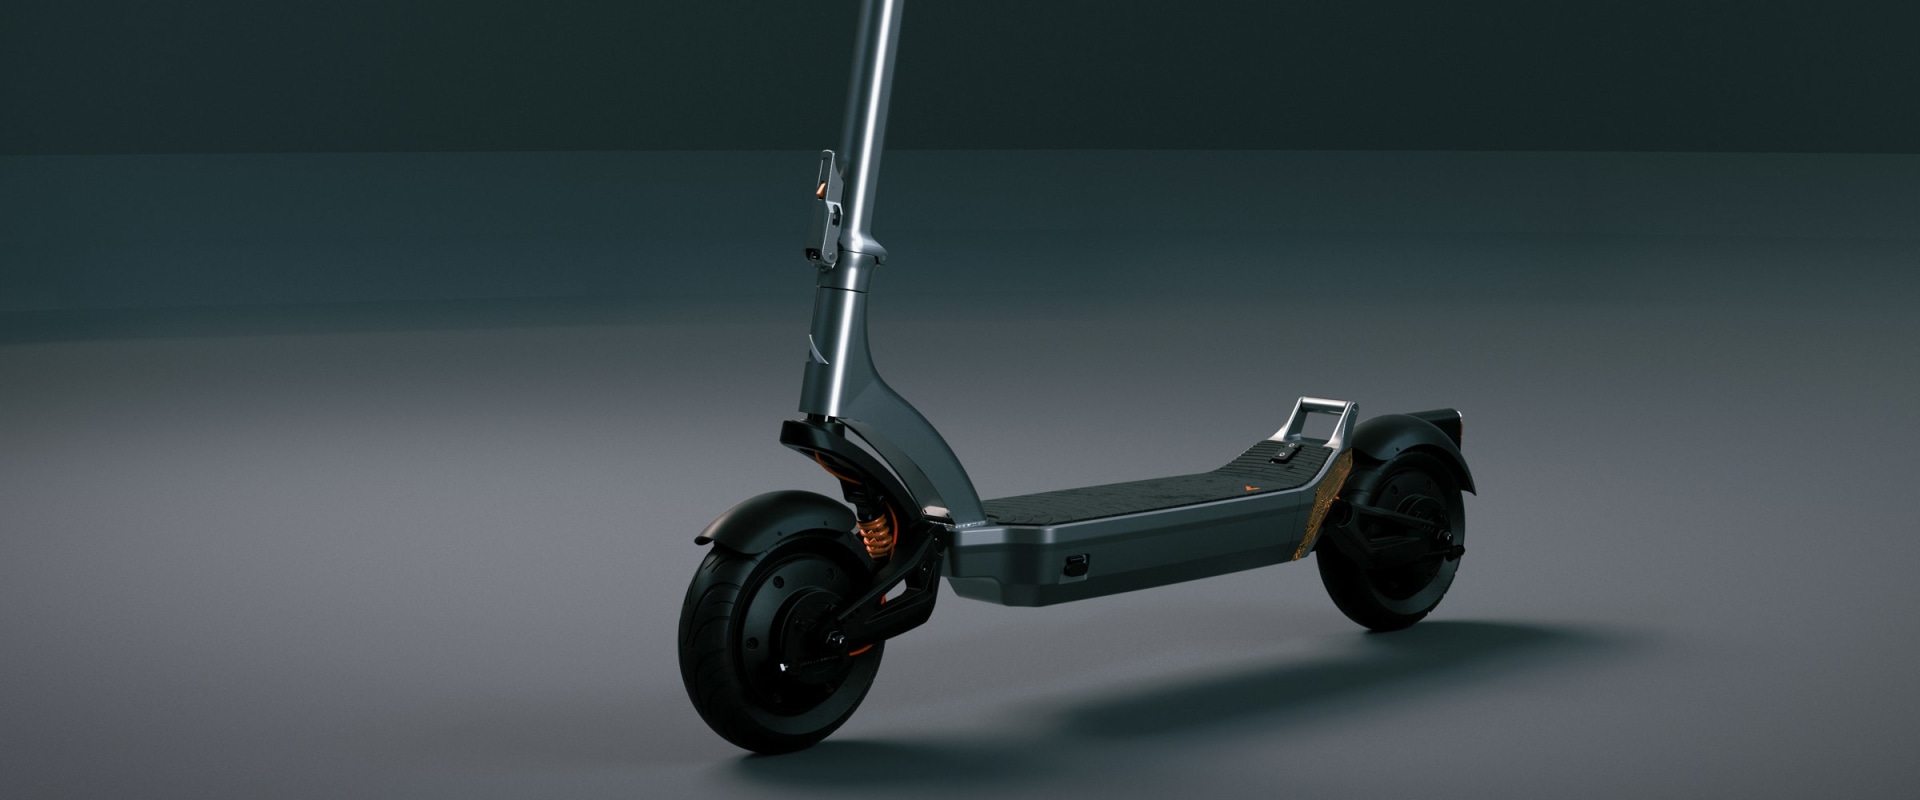 Which Electric Scooter is the Most Powerful and Reliable?